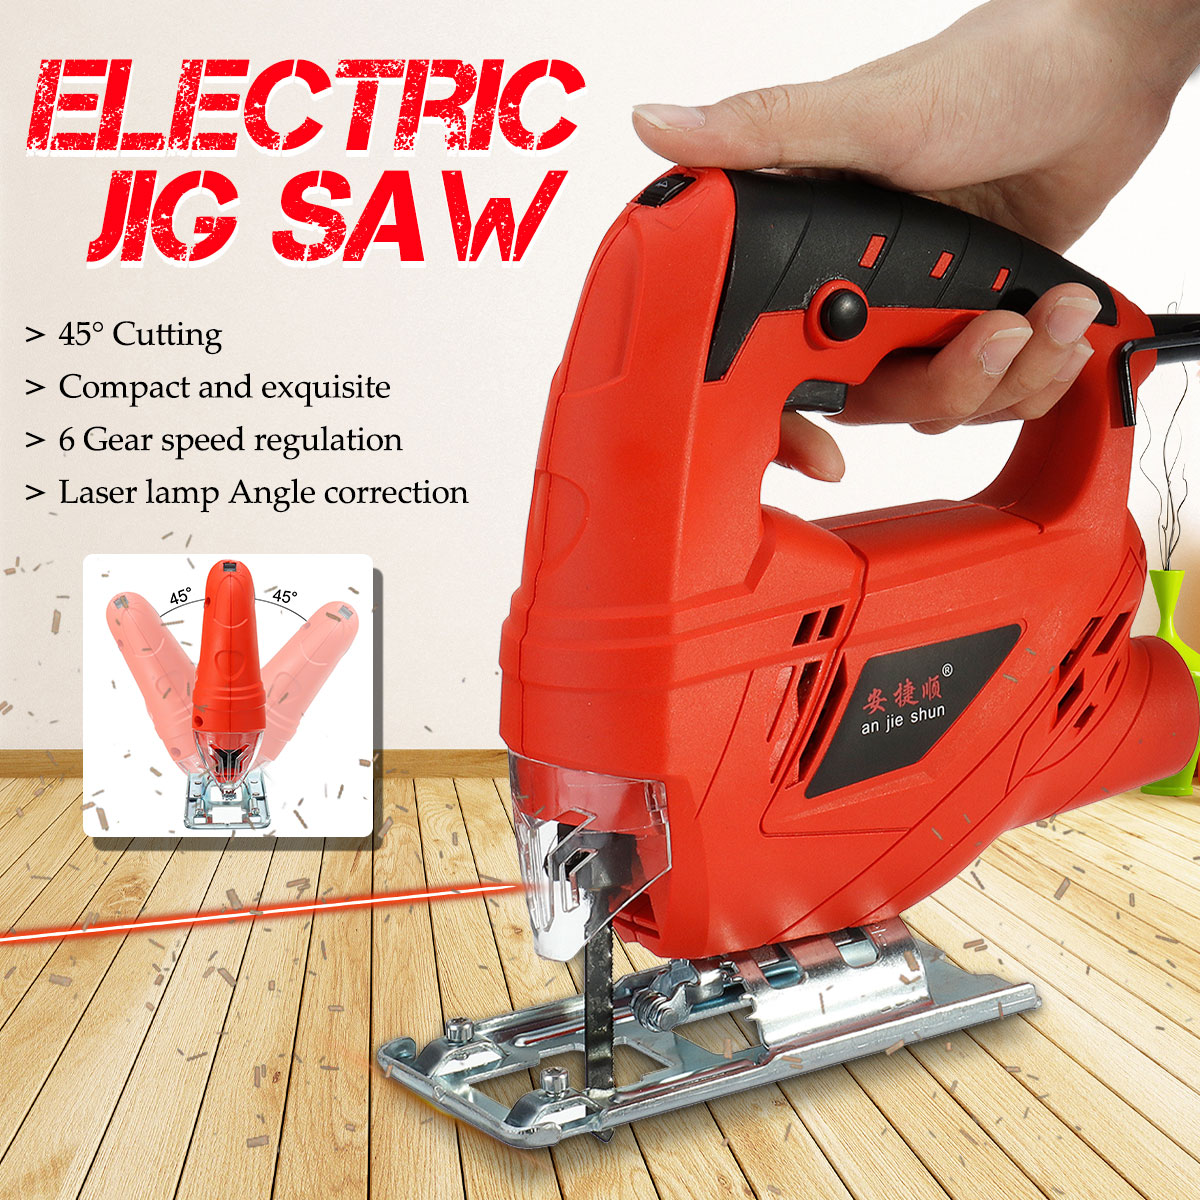 Electric-Jig-Saw-Variable-Speed-Power-Tools-Metal-Wood-Cutting-with-10-Saw-Blade-1541187-1